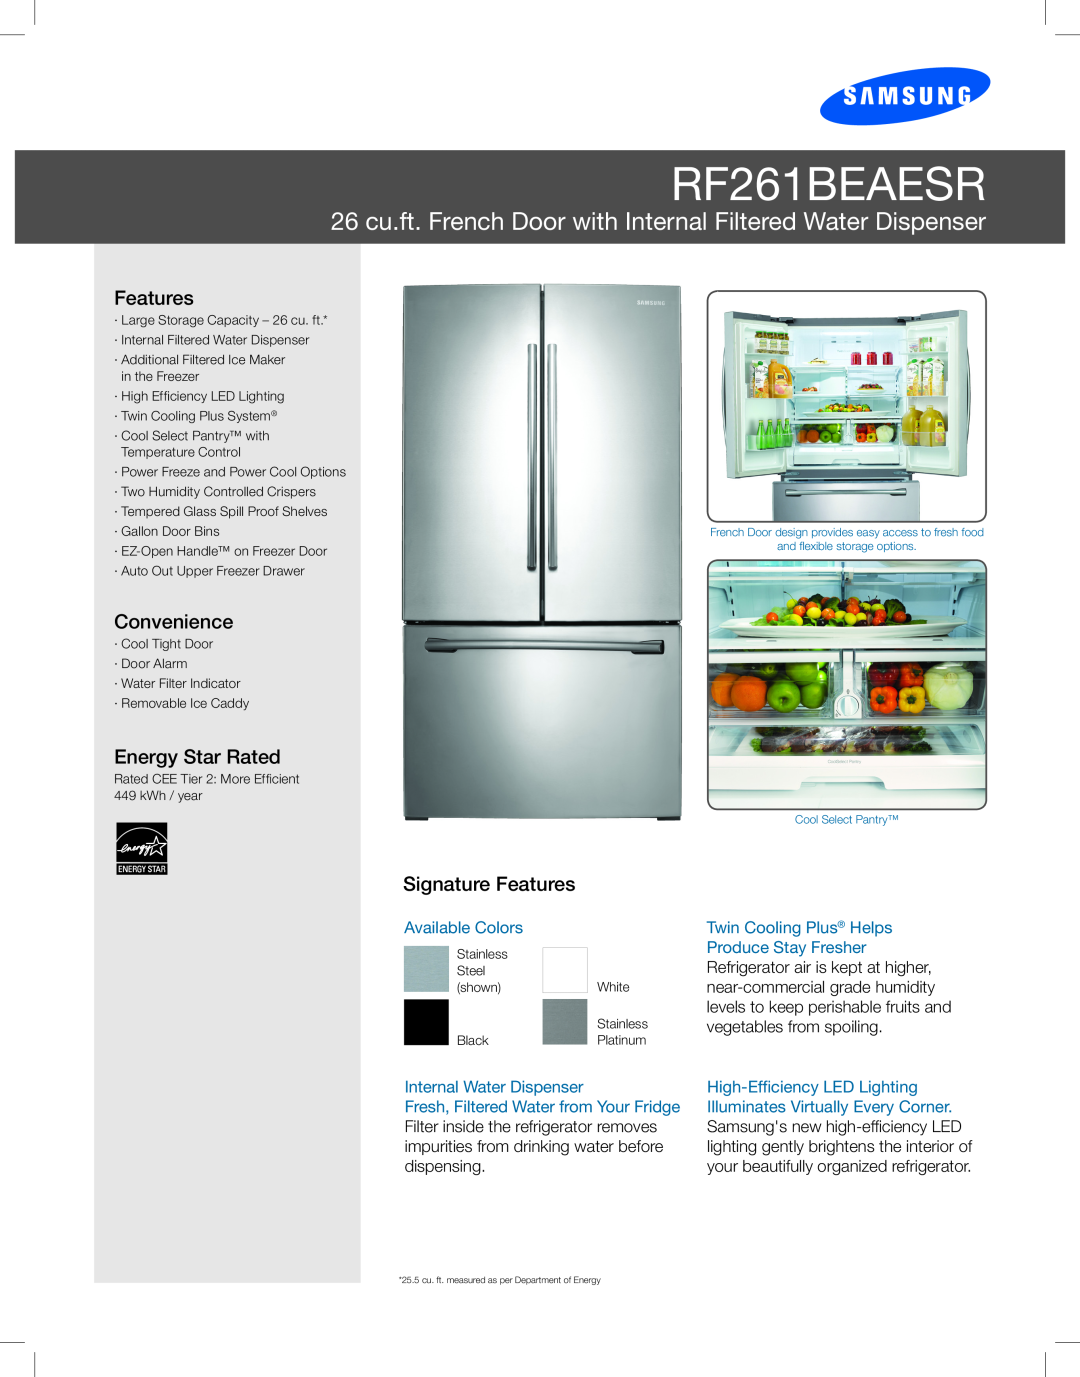 Samsung GI6FARXXY user manual Refrigerator, imagine the possibilities, Thank you for purchasing this Samsung product 